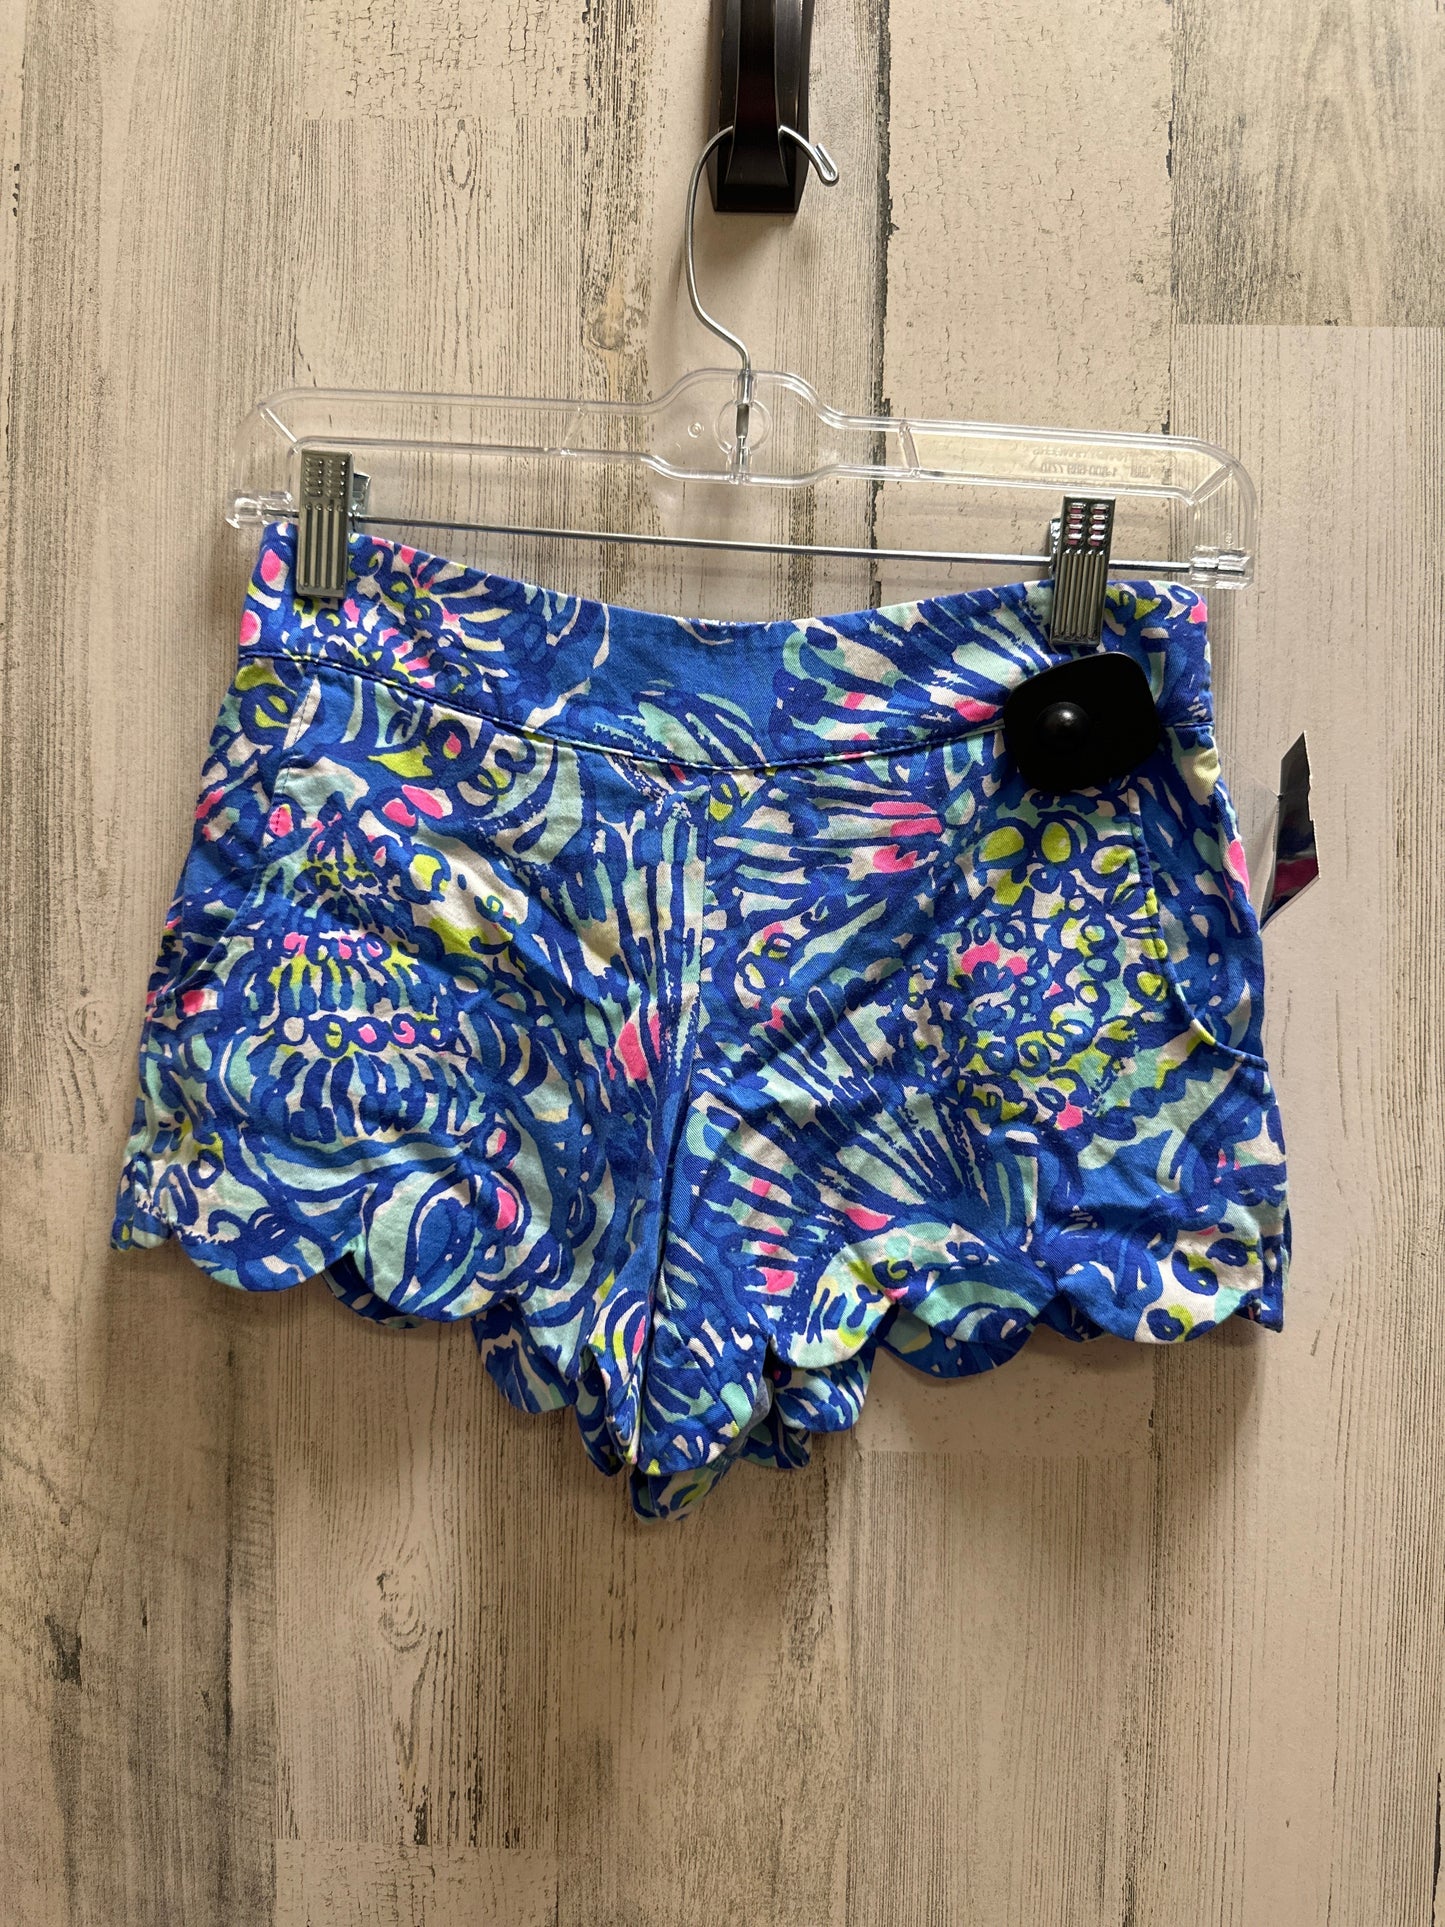 Blue Shorts Lilly Pulitzer, Size Xs